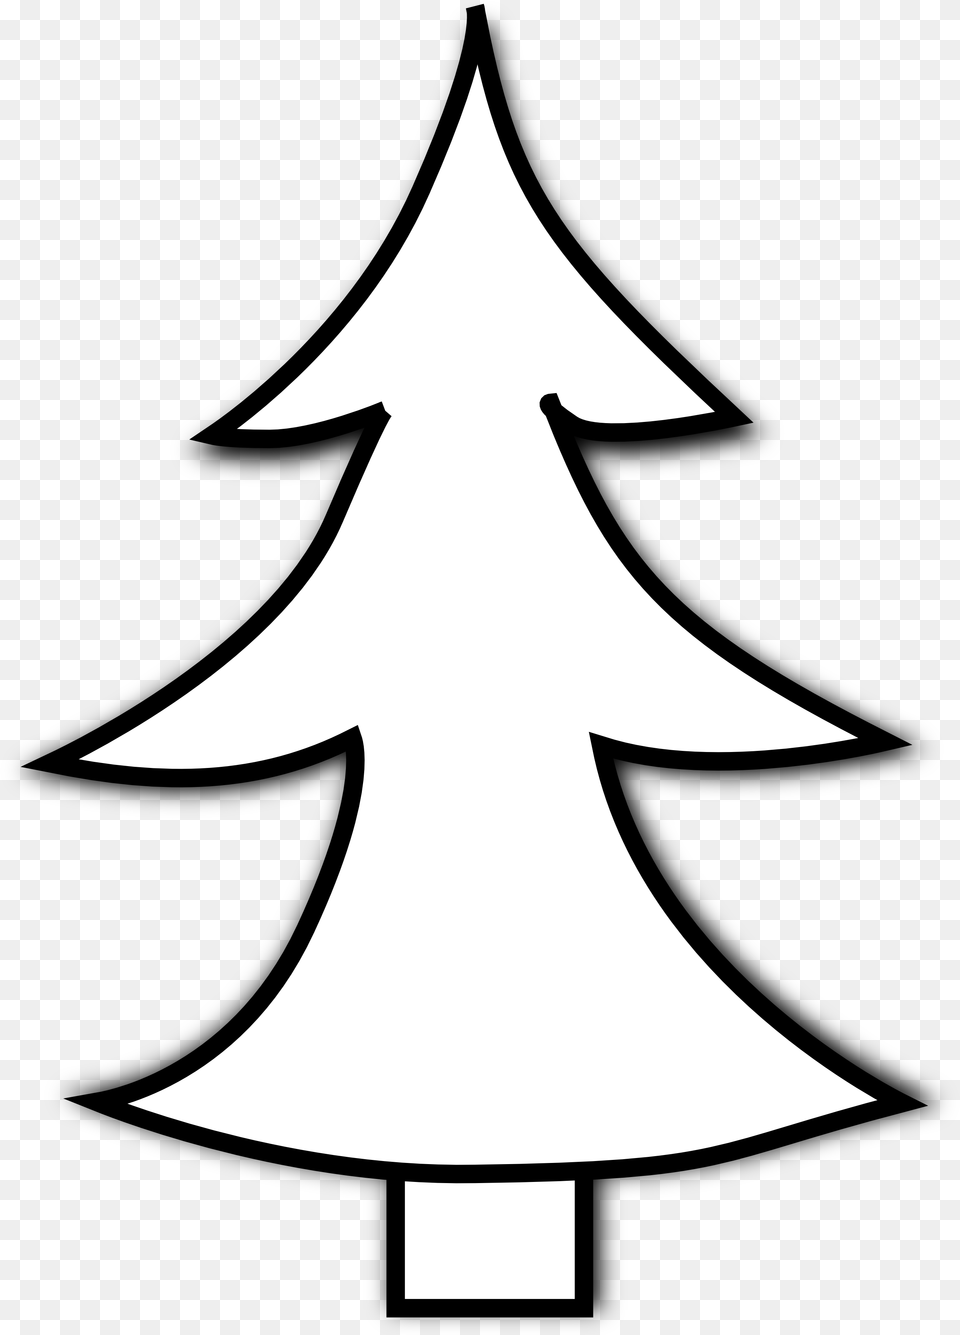 White Christmas Tree Clipart Black Clipart Black And White Christmas Tree, Stencil, Silhouette, Animal, Fish Free Transparent Png